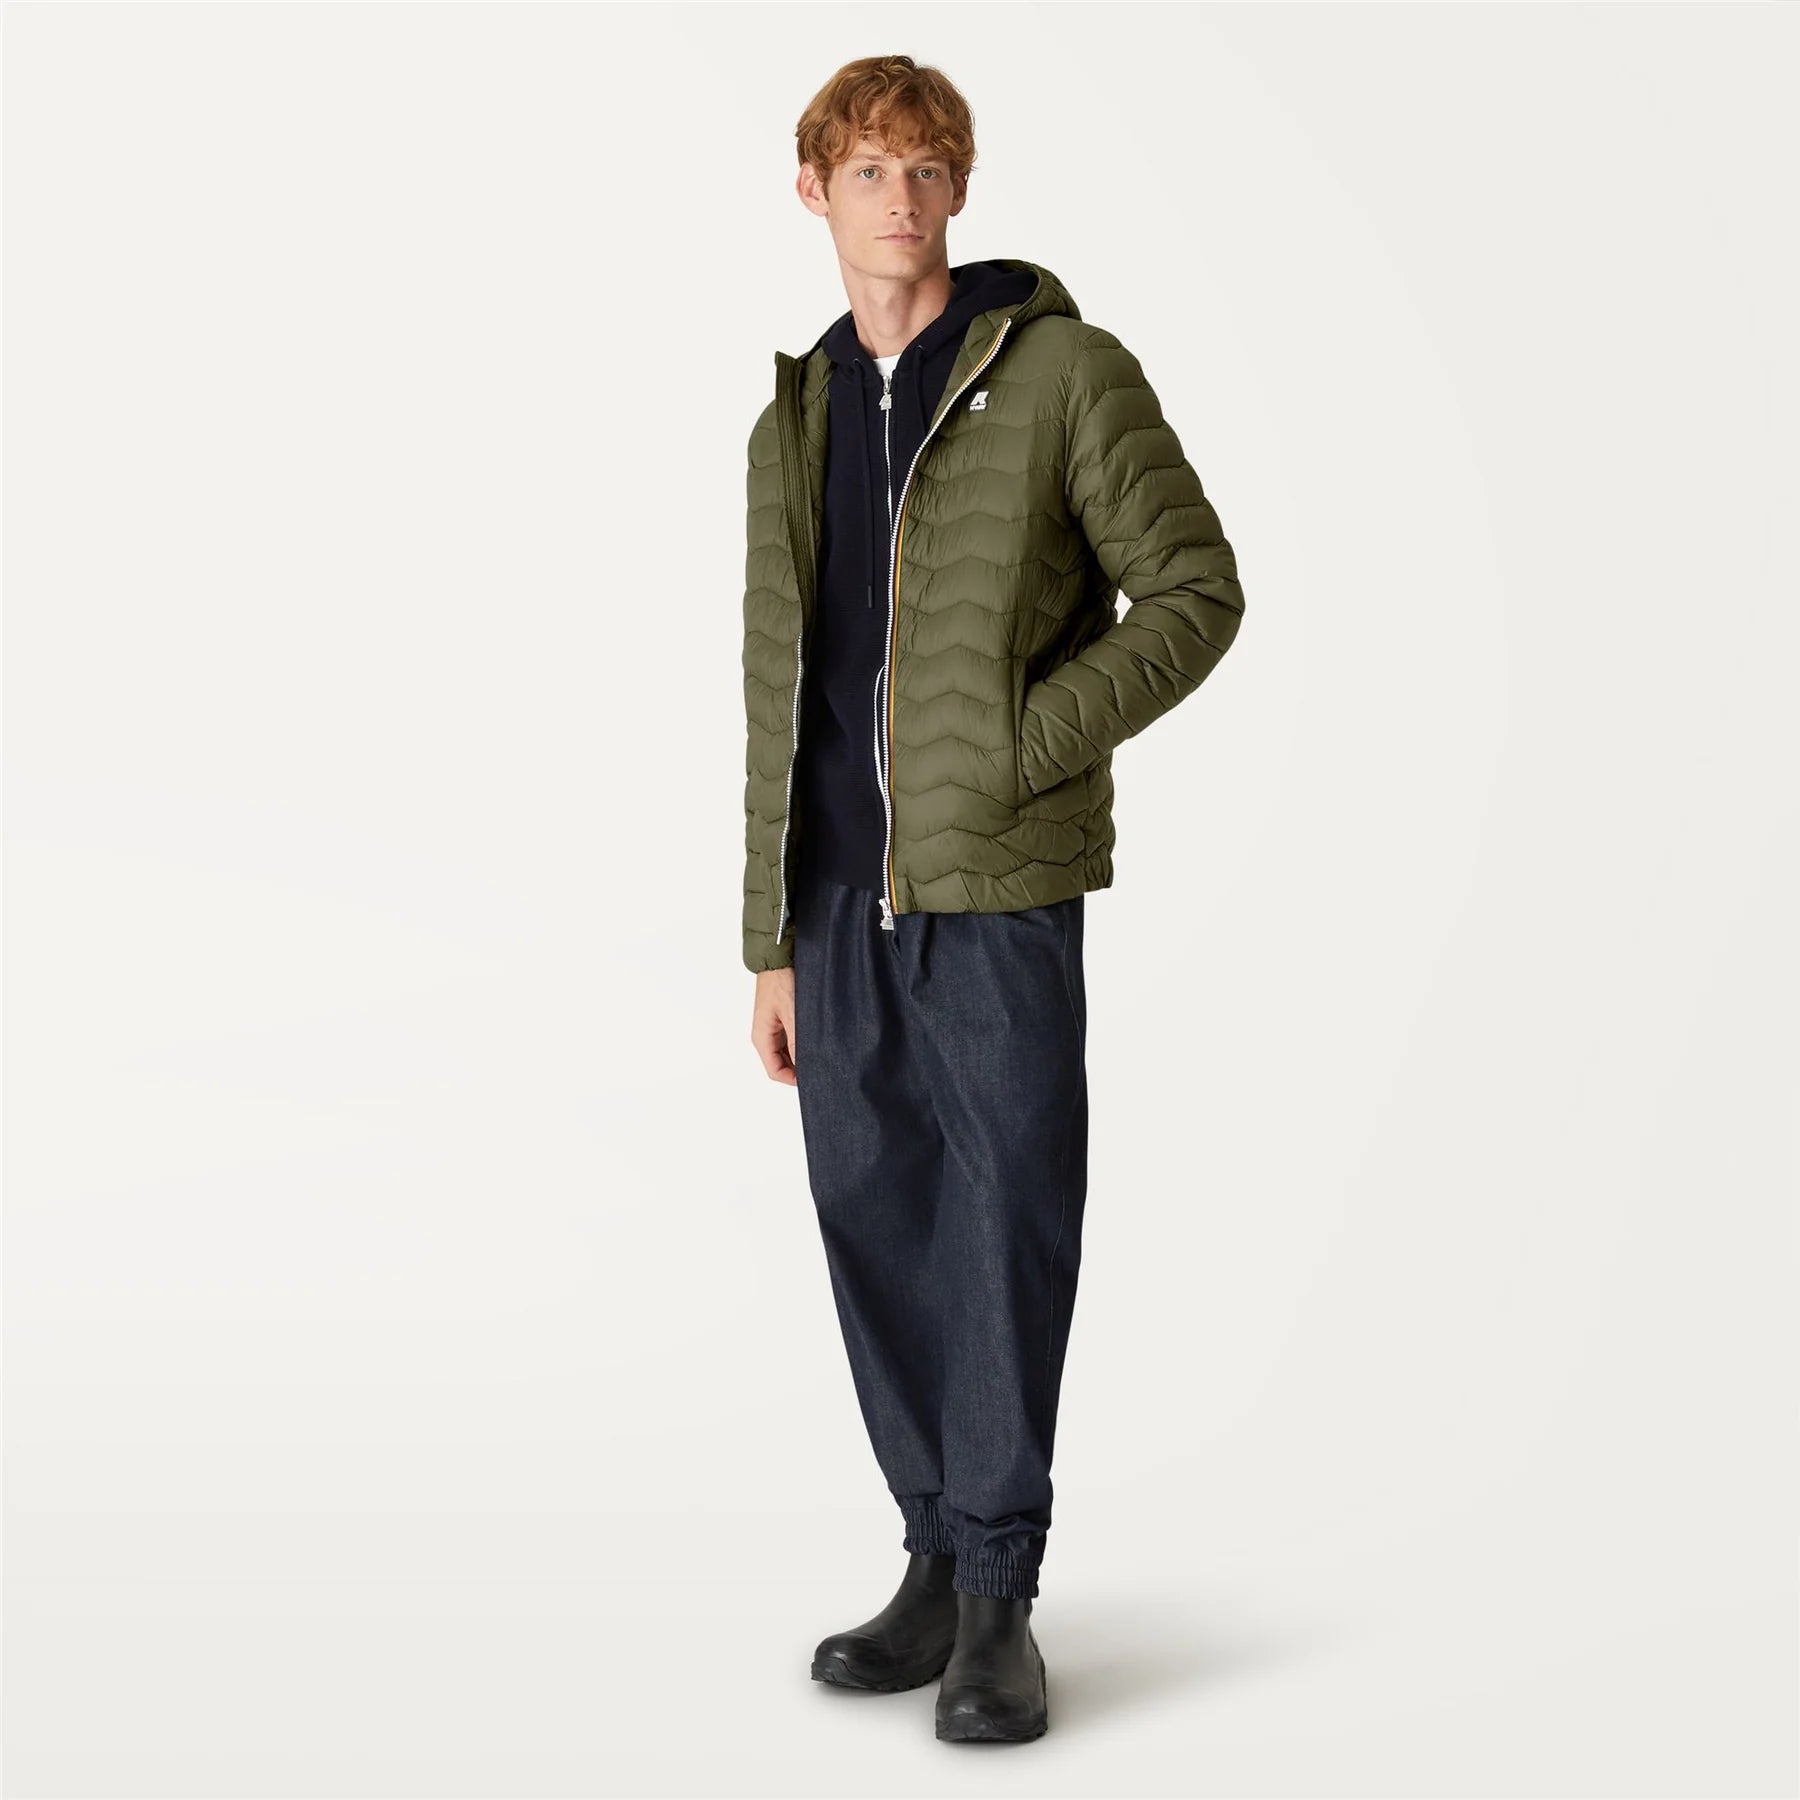 Jack Warm - Men's Quilted Packable Puffer Jacket in Green Blackish